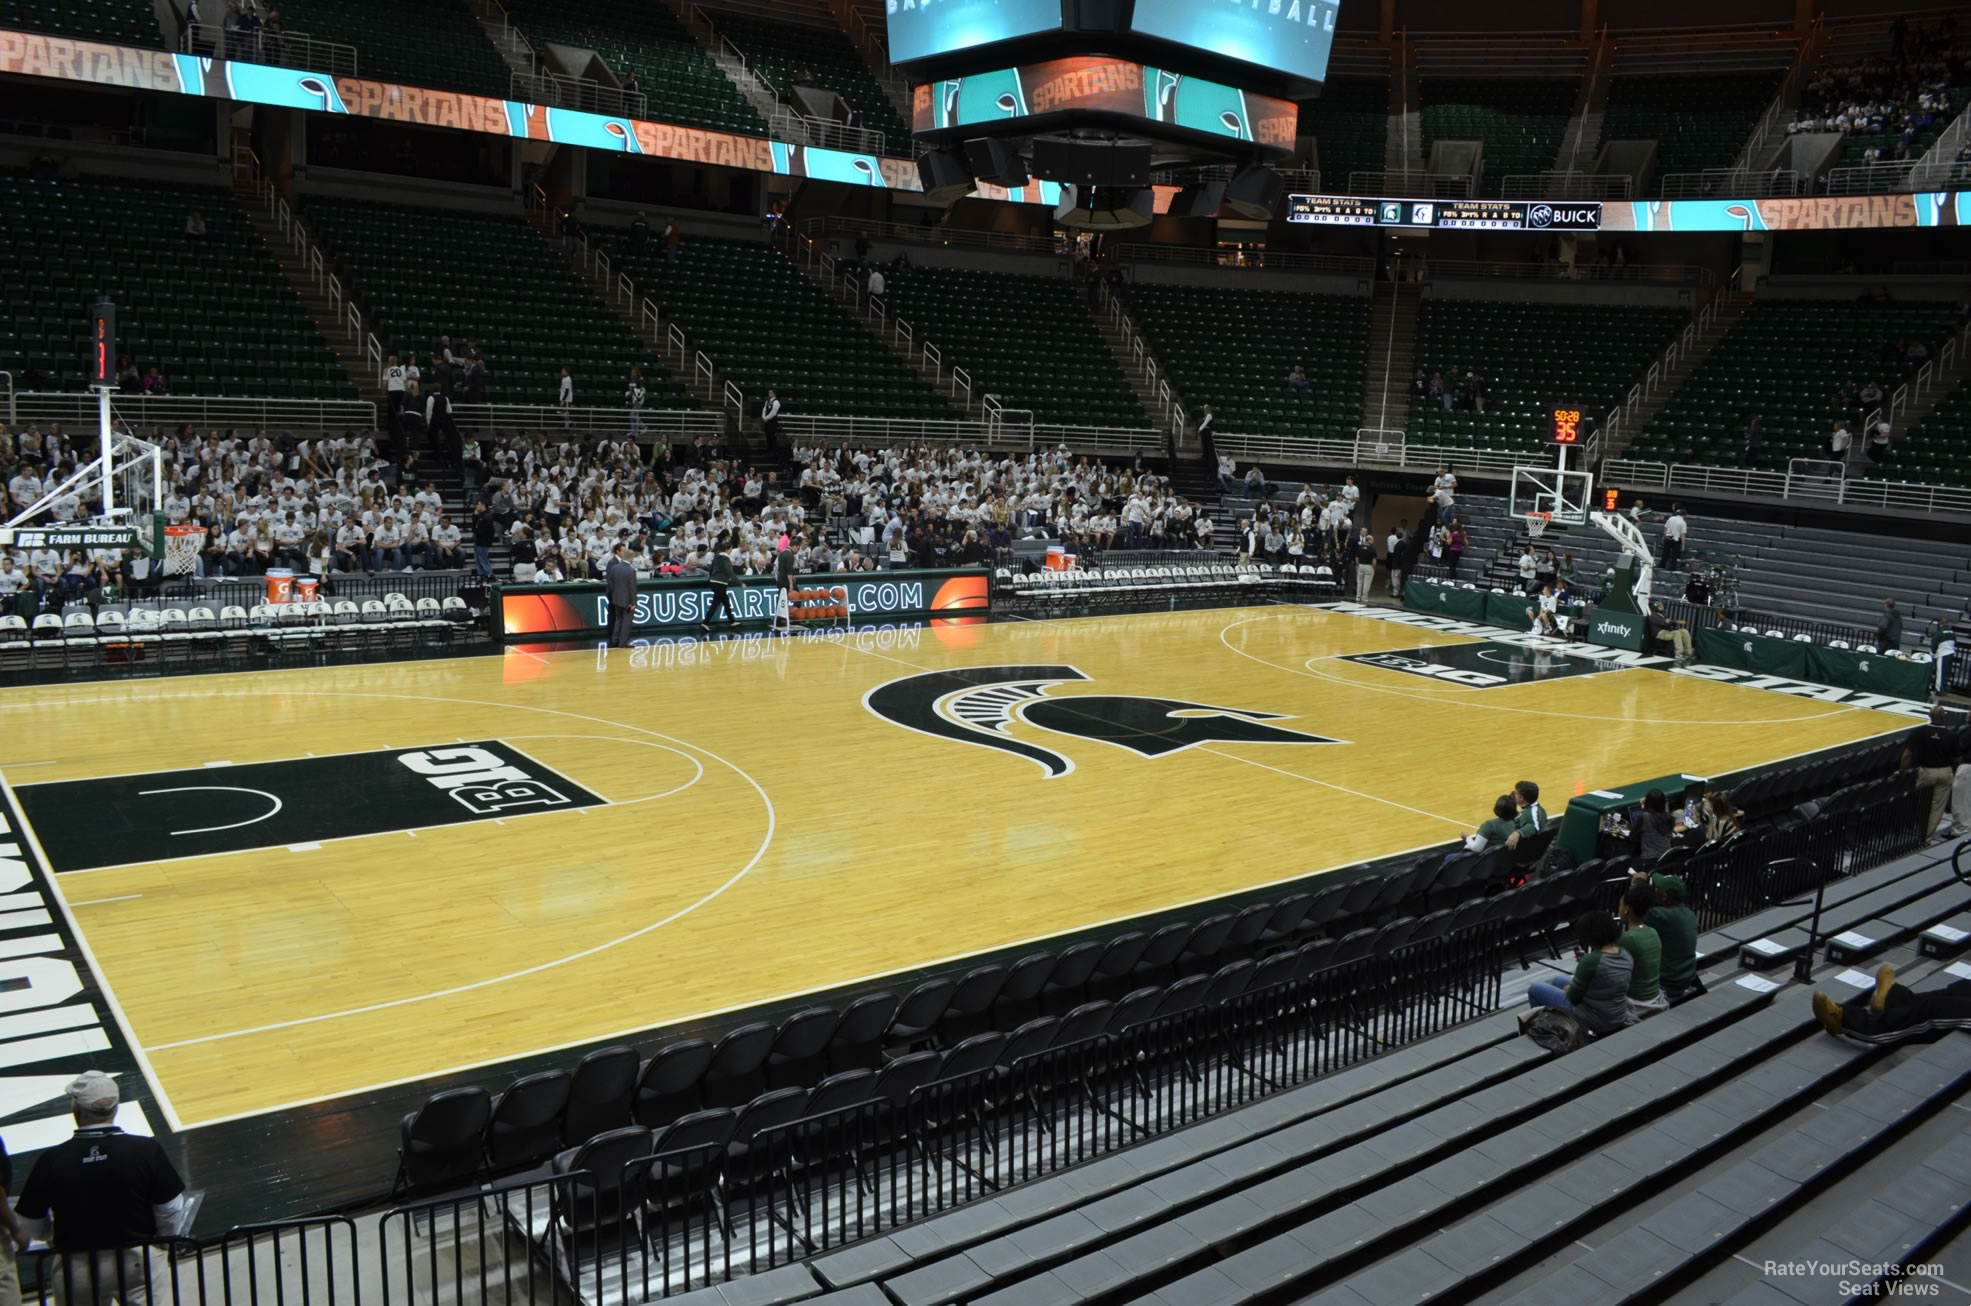 section 131, row 13 seat view  - breslin center